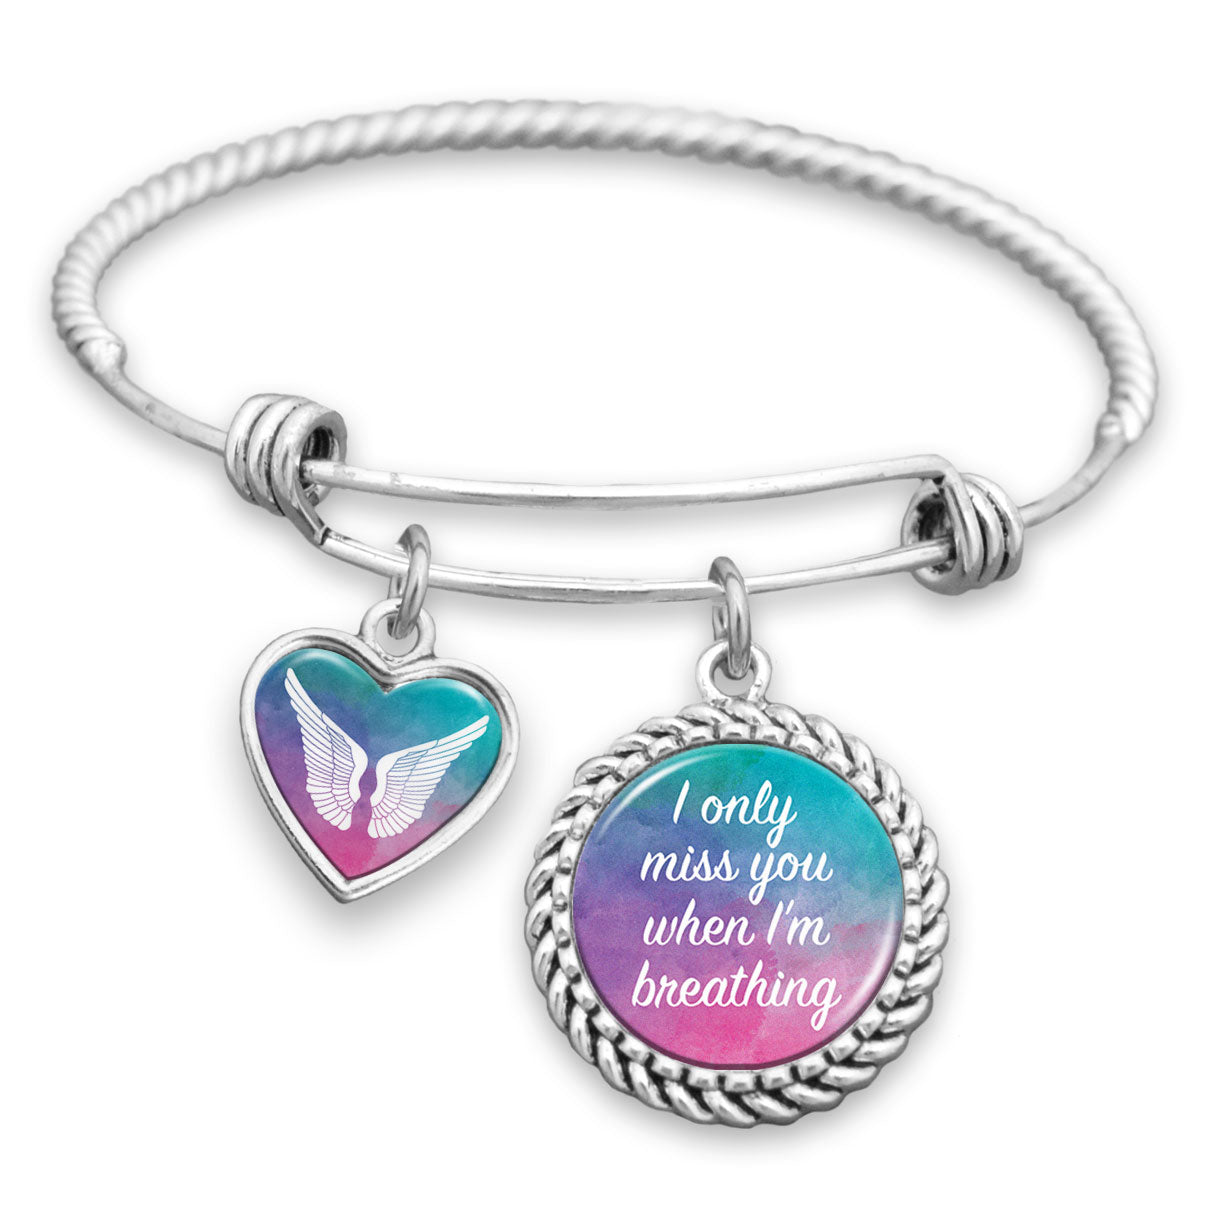 I Only Miss You When I'm Breathing Watercolor Charm Bracelet